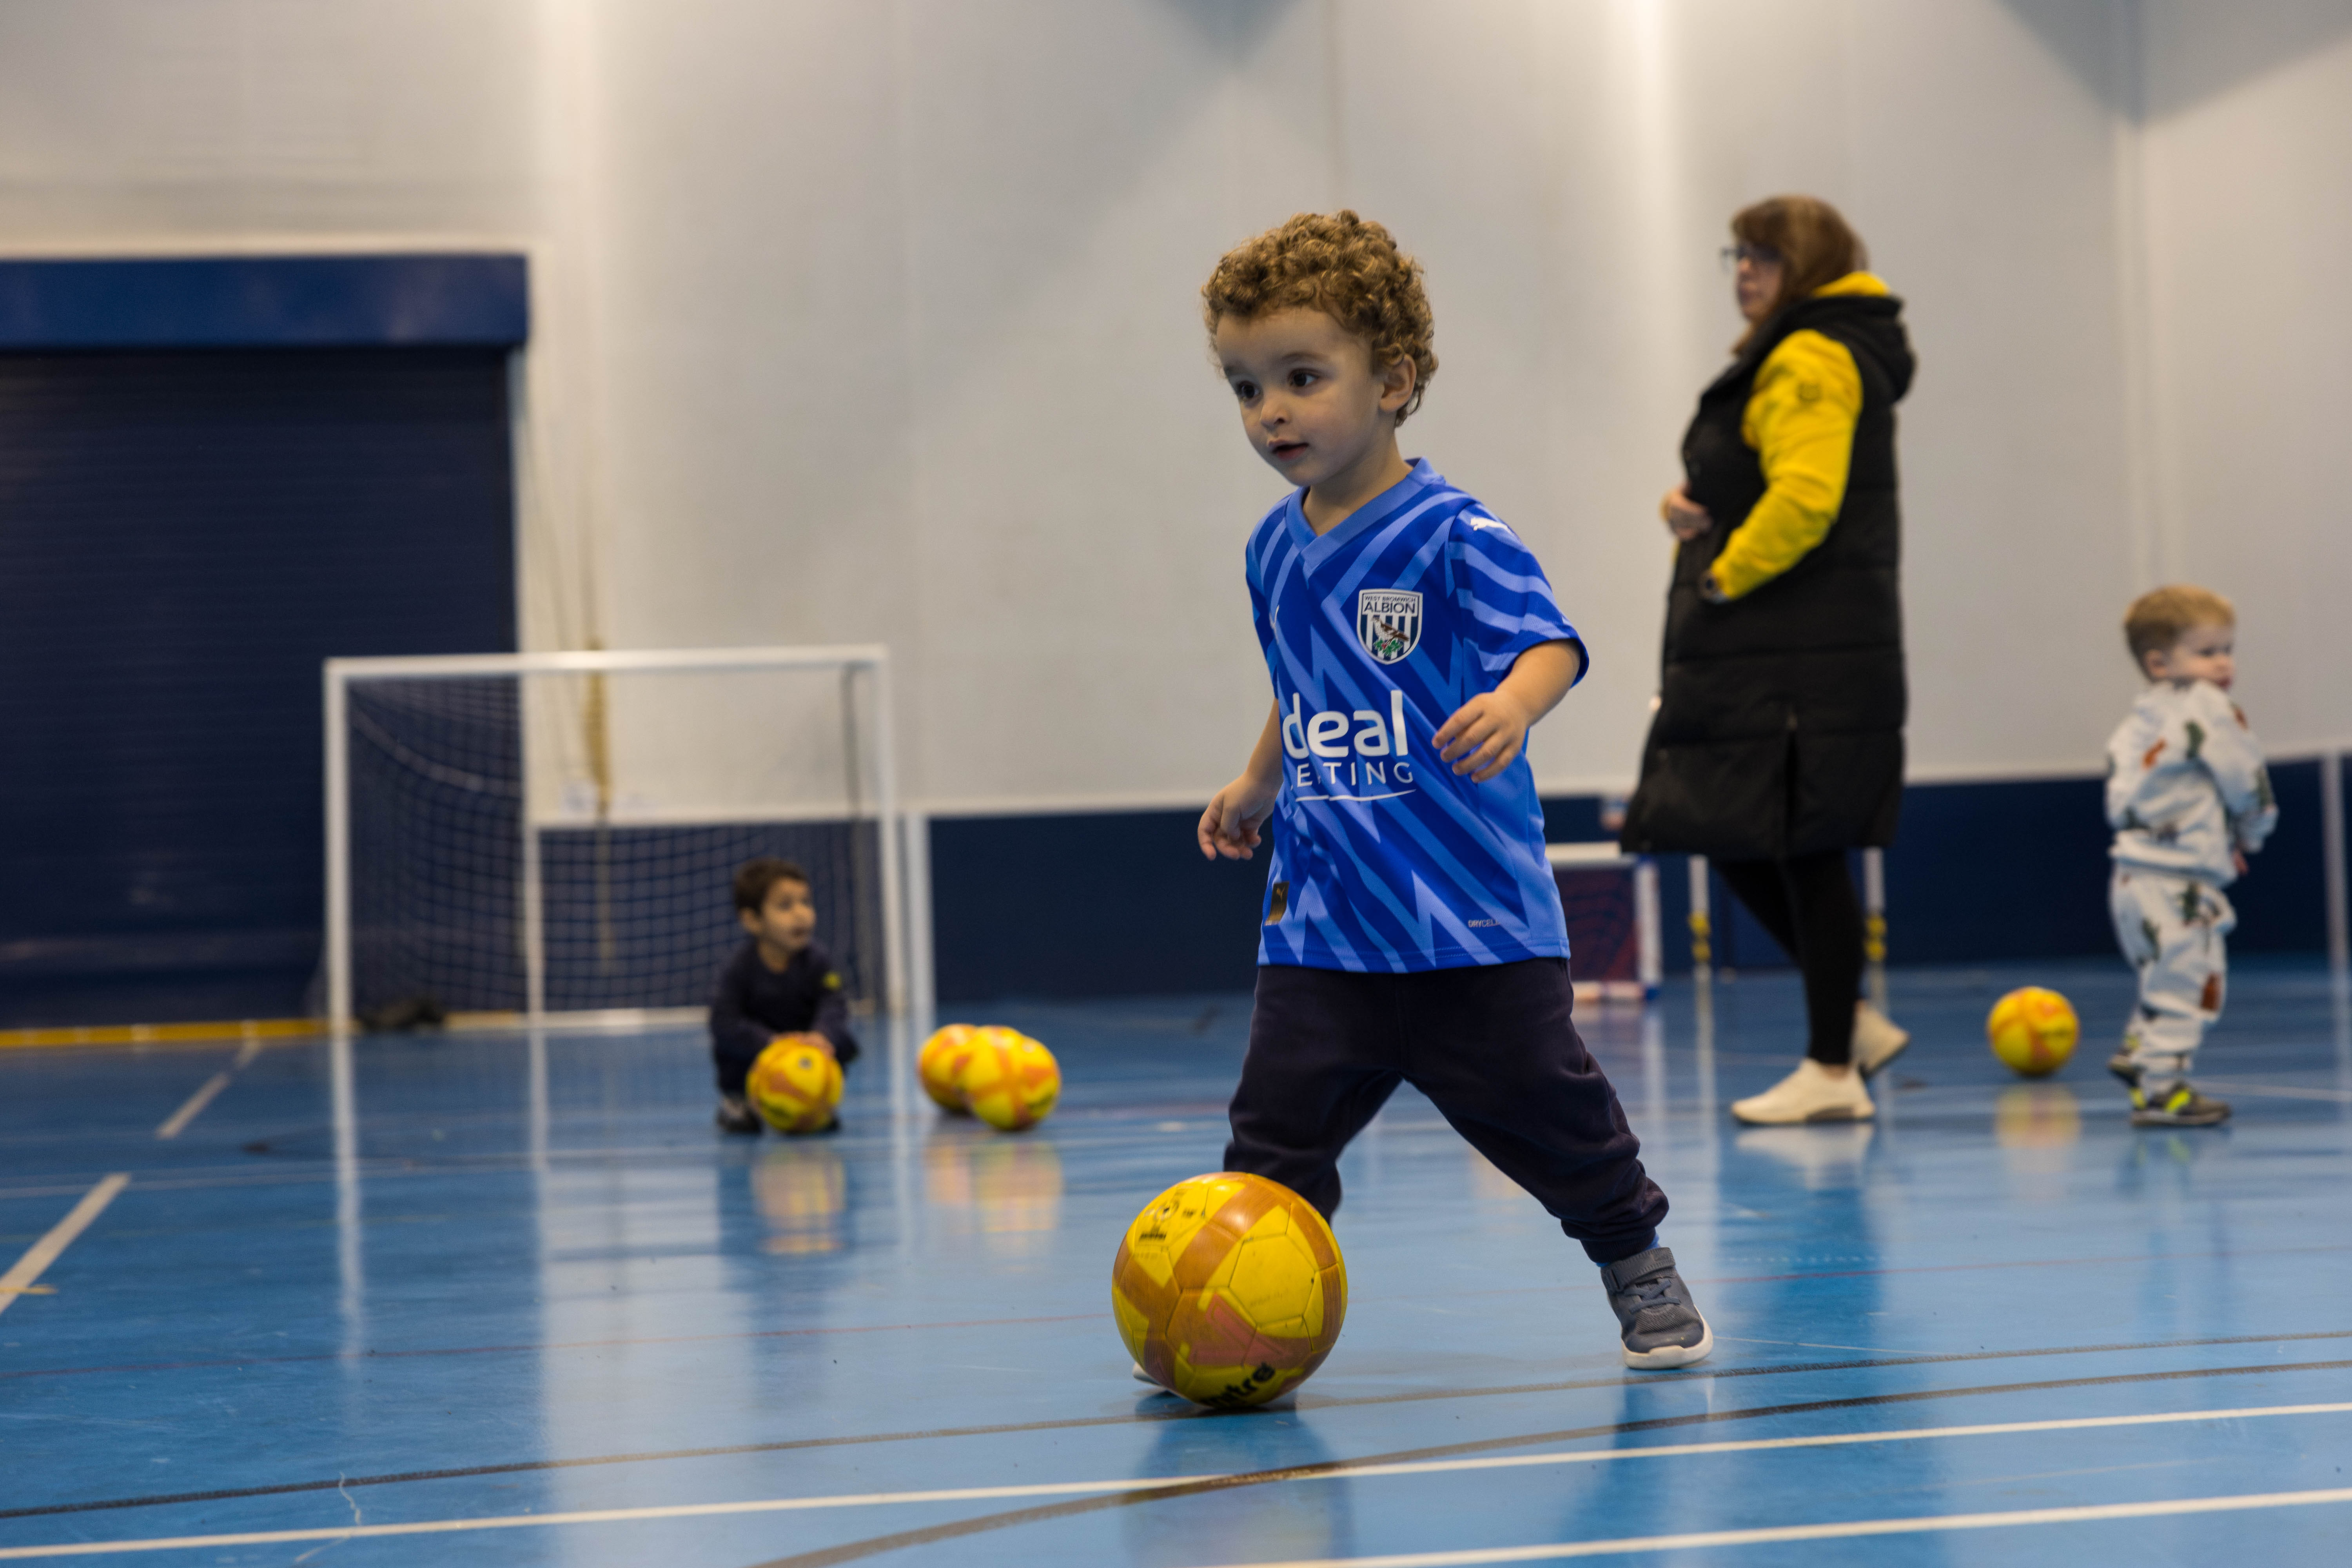 Mini Baggies participant in blue WBA kit, playing with a football